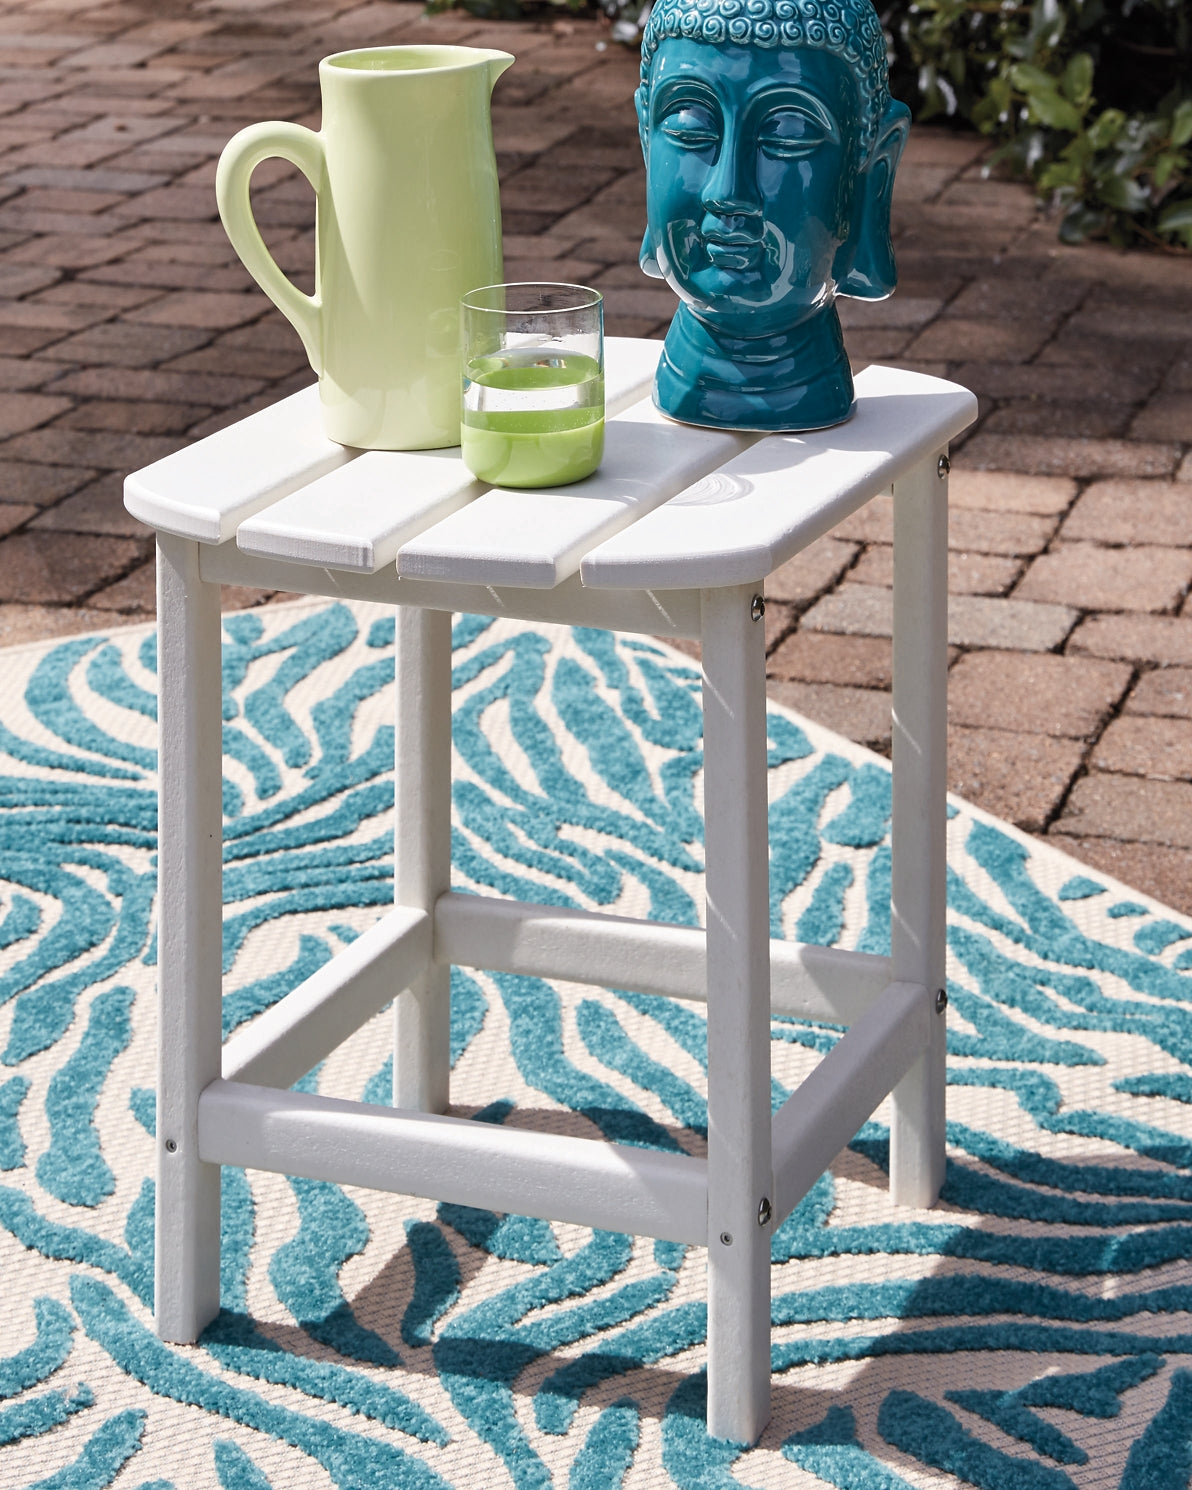 Sundown Treasure Outdoor Chair with End Table at Cloud 9 Mattress & Furniture furniture, home furnishing, home decor